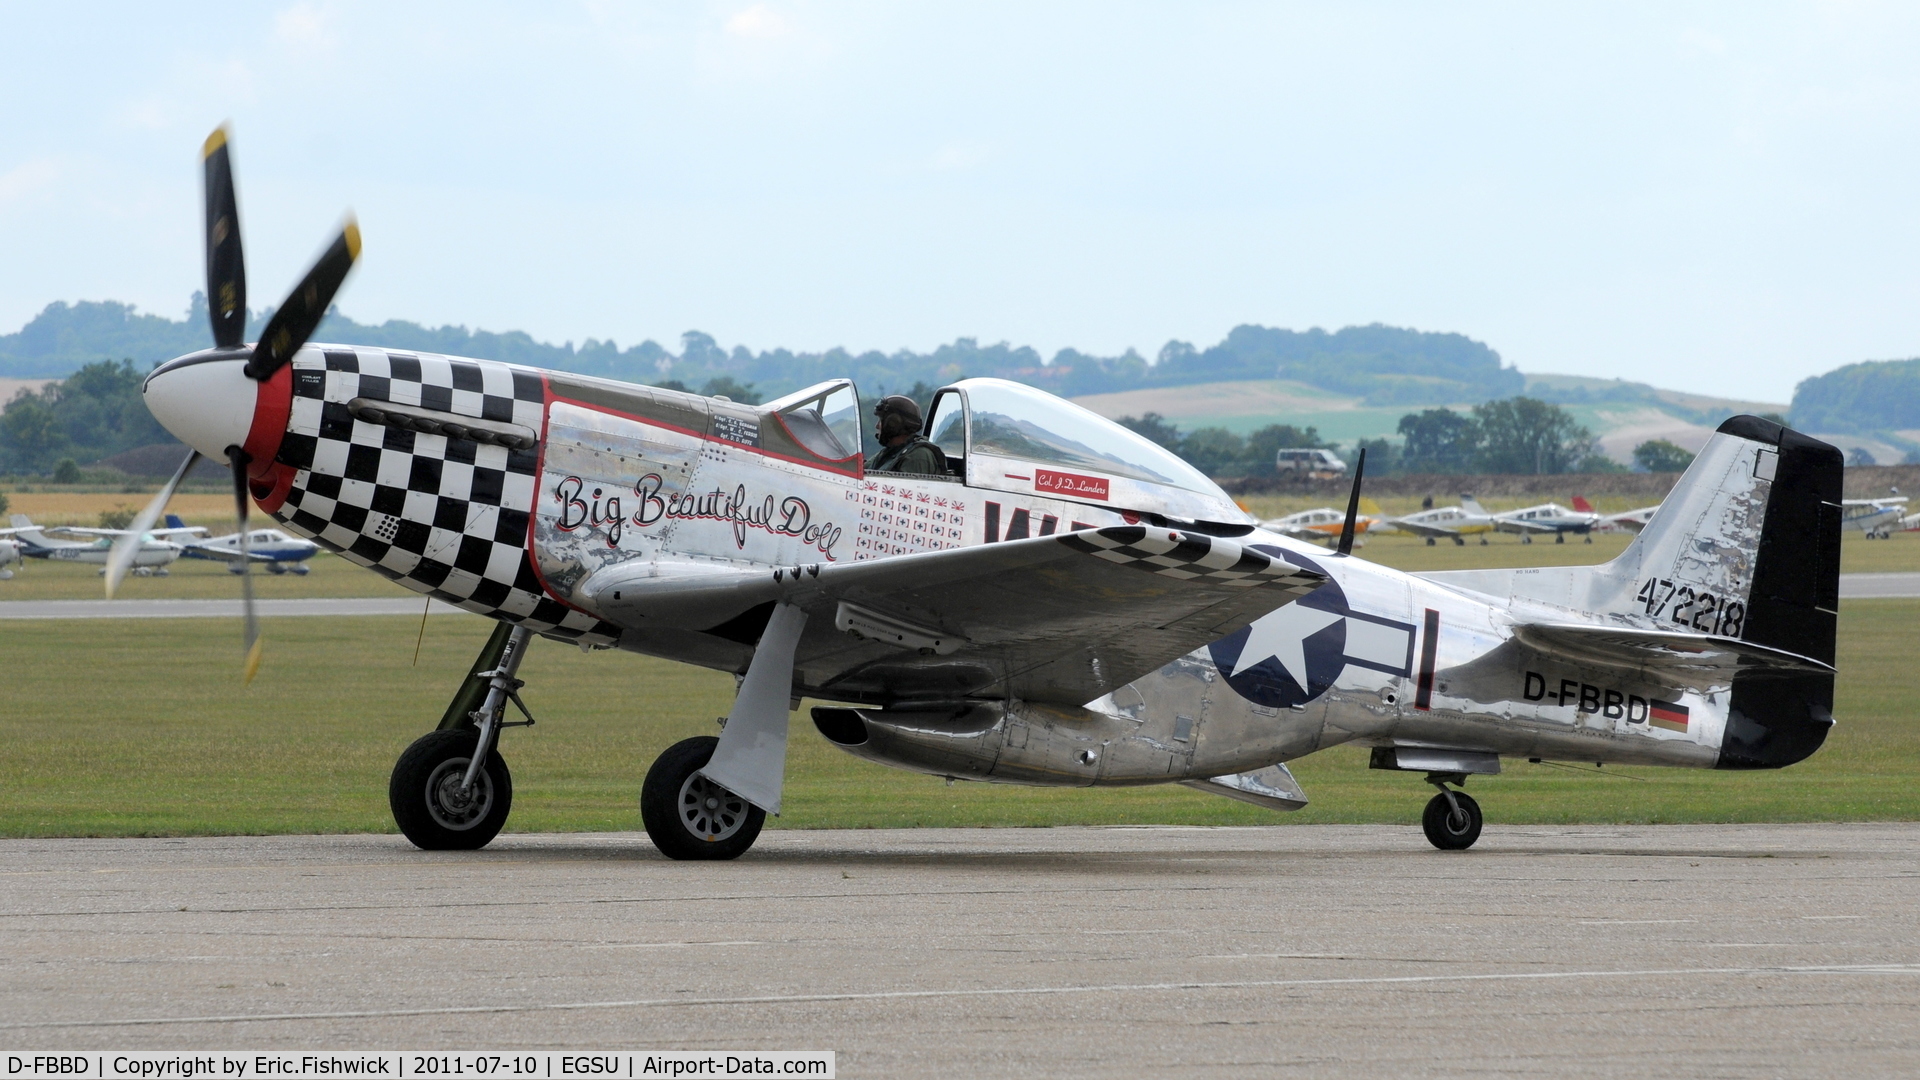 D-FBBD, 1951 Commonwealth CA-18 Mustang 22 (P-51D) C/N CACM-192-1517, 3. D-FBBD at Flying Legends Air Show, July 2011